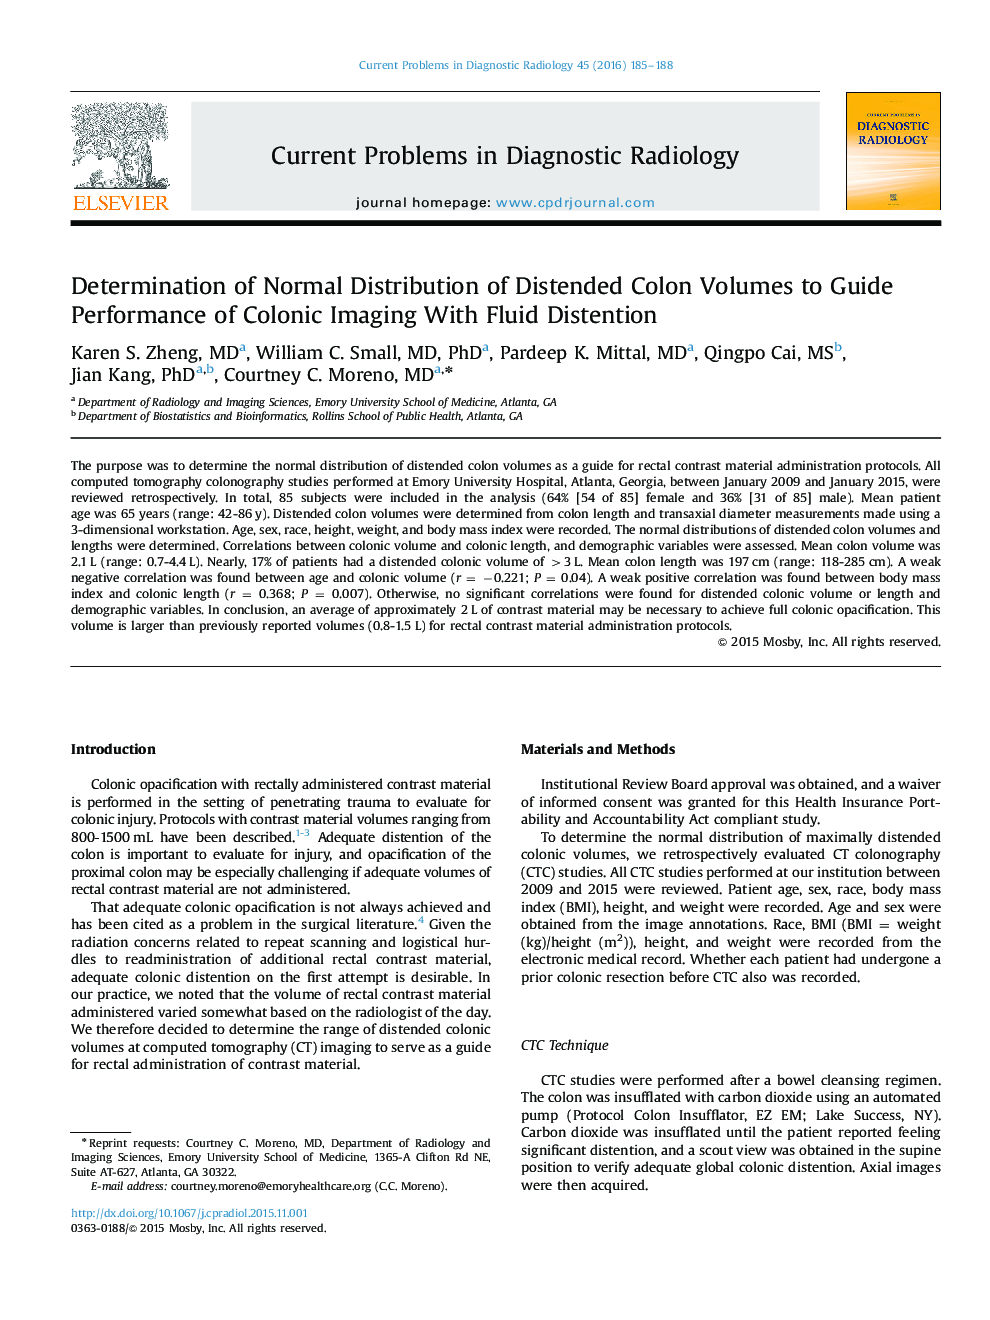 Determination of Normal Distribution of Distended Colon Volumes to Guide Performance of Colonic Imaging With Fluid Distention